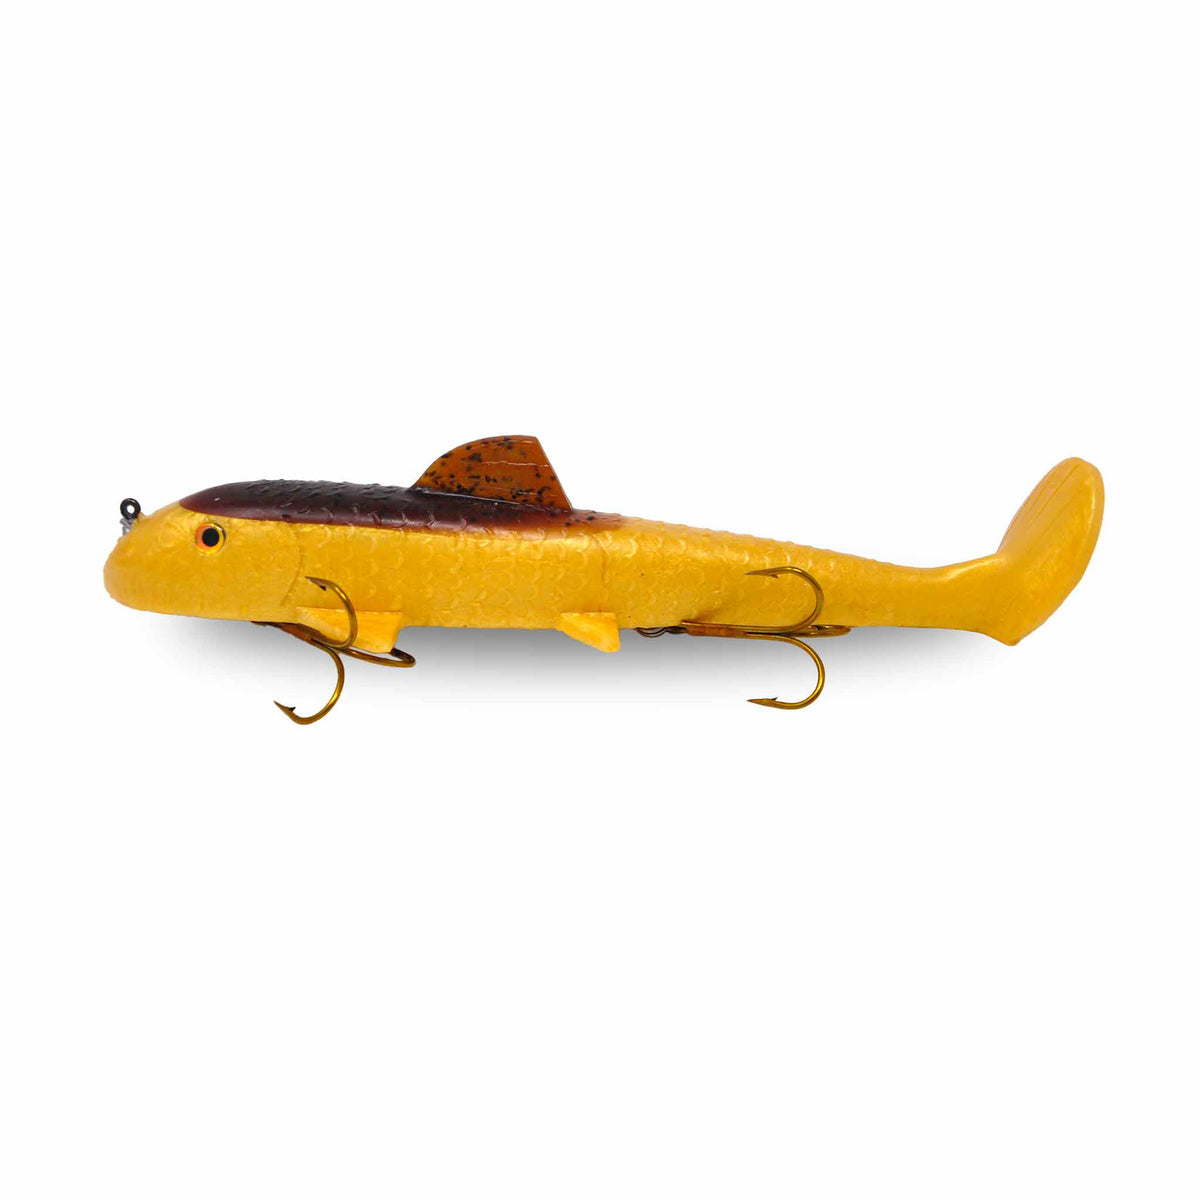 View of Rubber Suick Suzy Sucker 11" Swimbait Dirty Walleye available at EZOKO Pike and Musky Shop